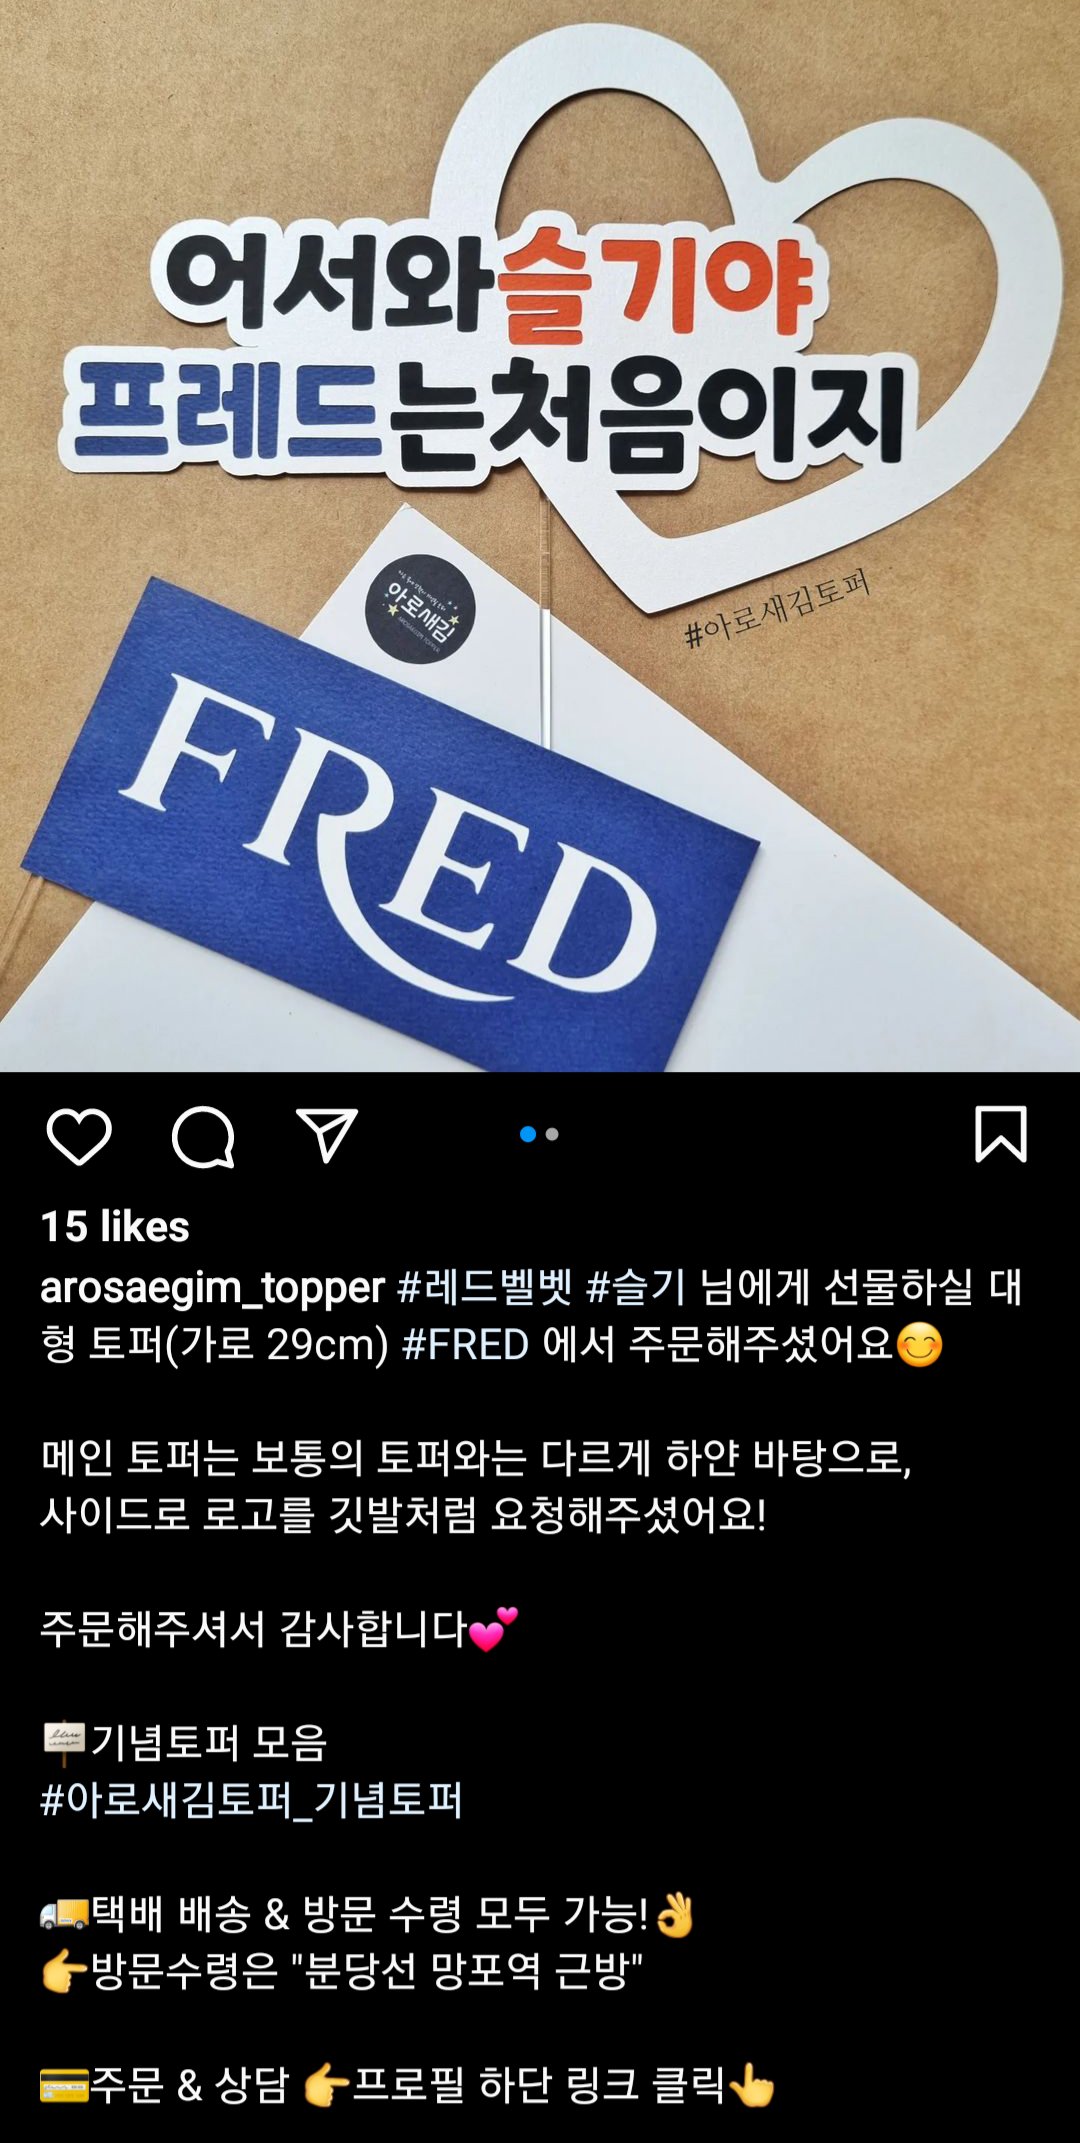 KSG Updates on X: FRED was founded in 1936 by Fred Samuel and is